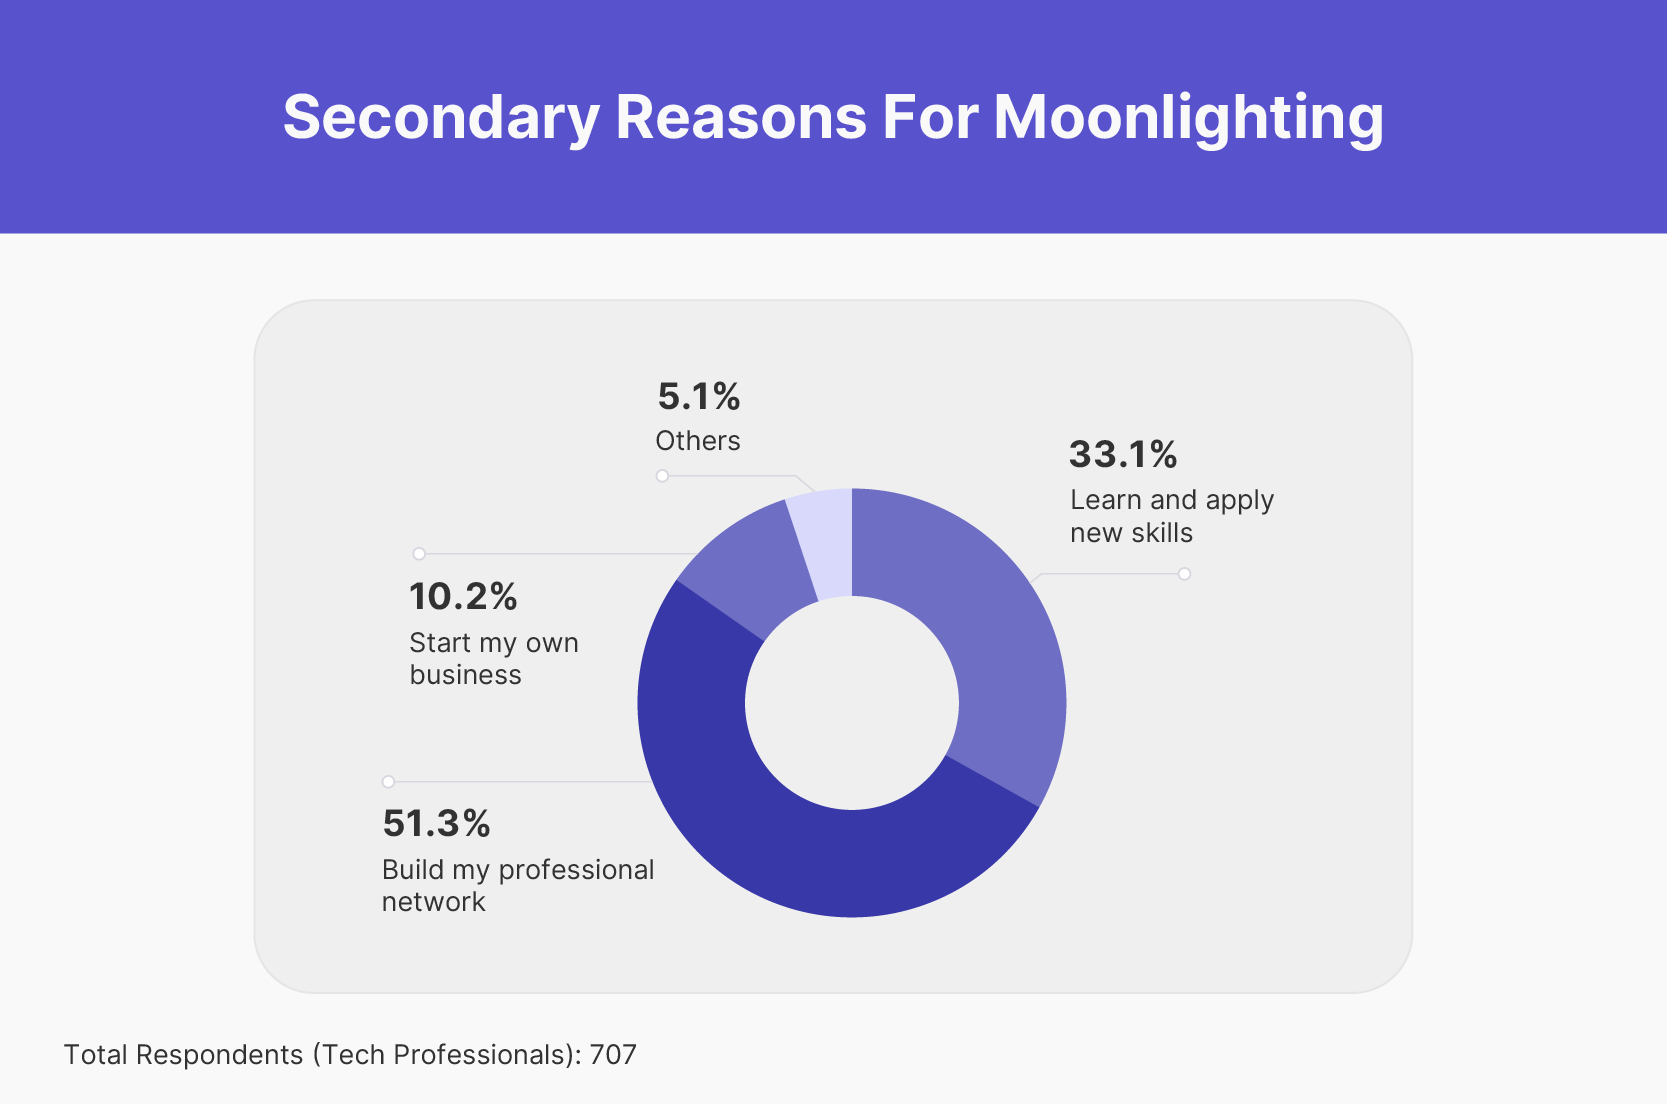 What are the motivations for moonlighting and how do they change with work experience